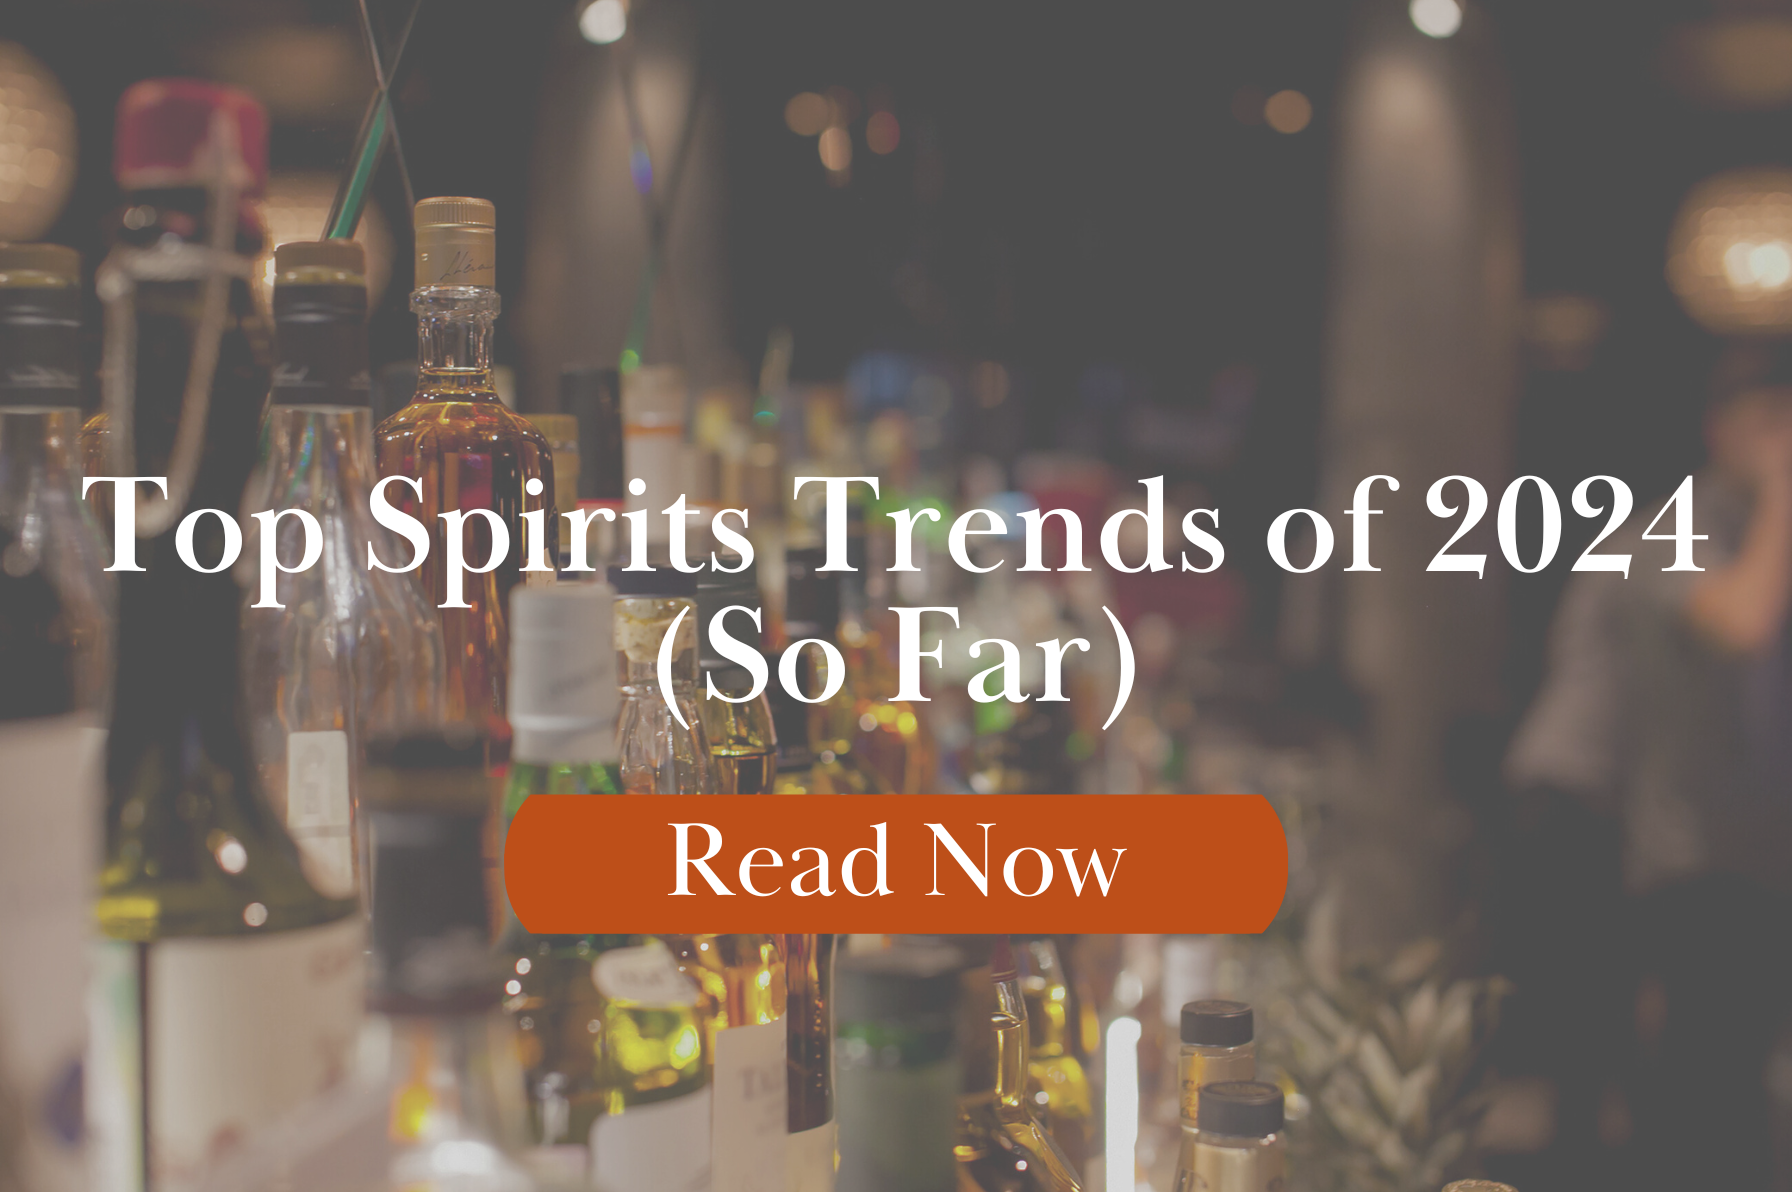 Top Spirits Trends of 2024: Mid Year Review